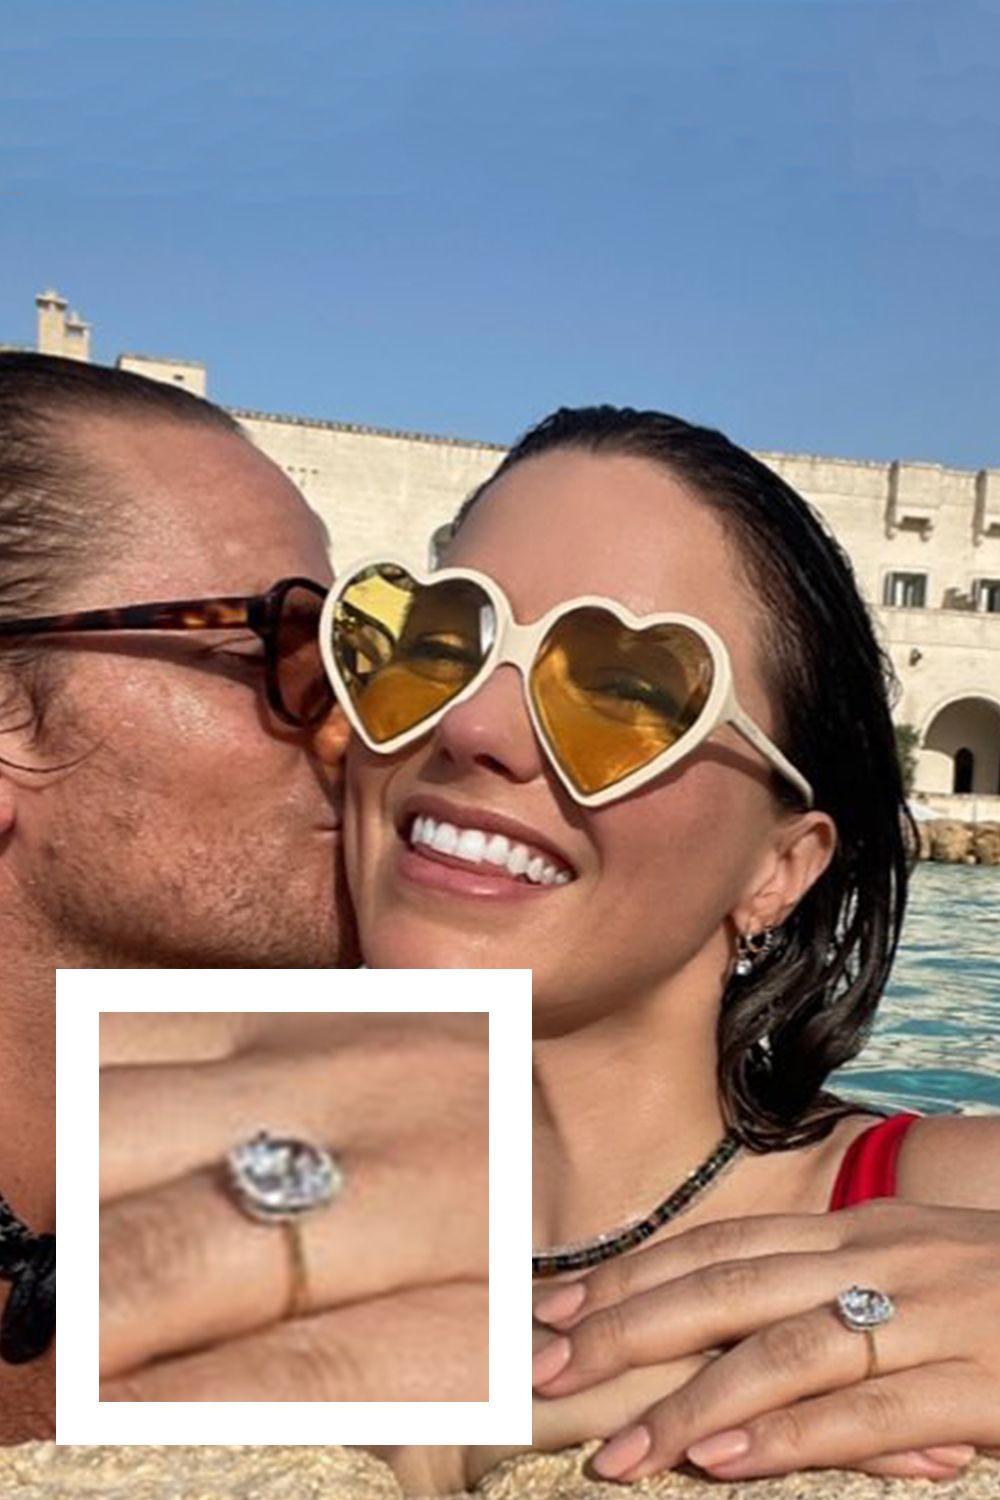 The Biggest Celebrity Engagement Rings of 2018